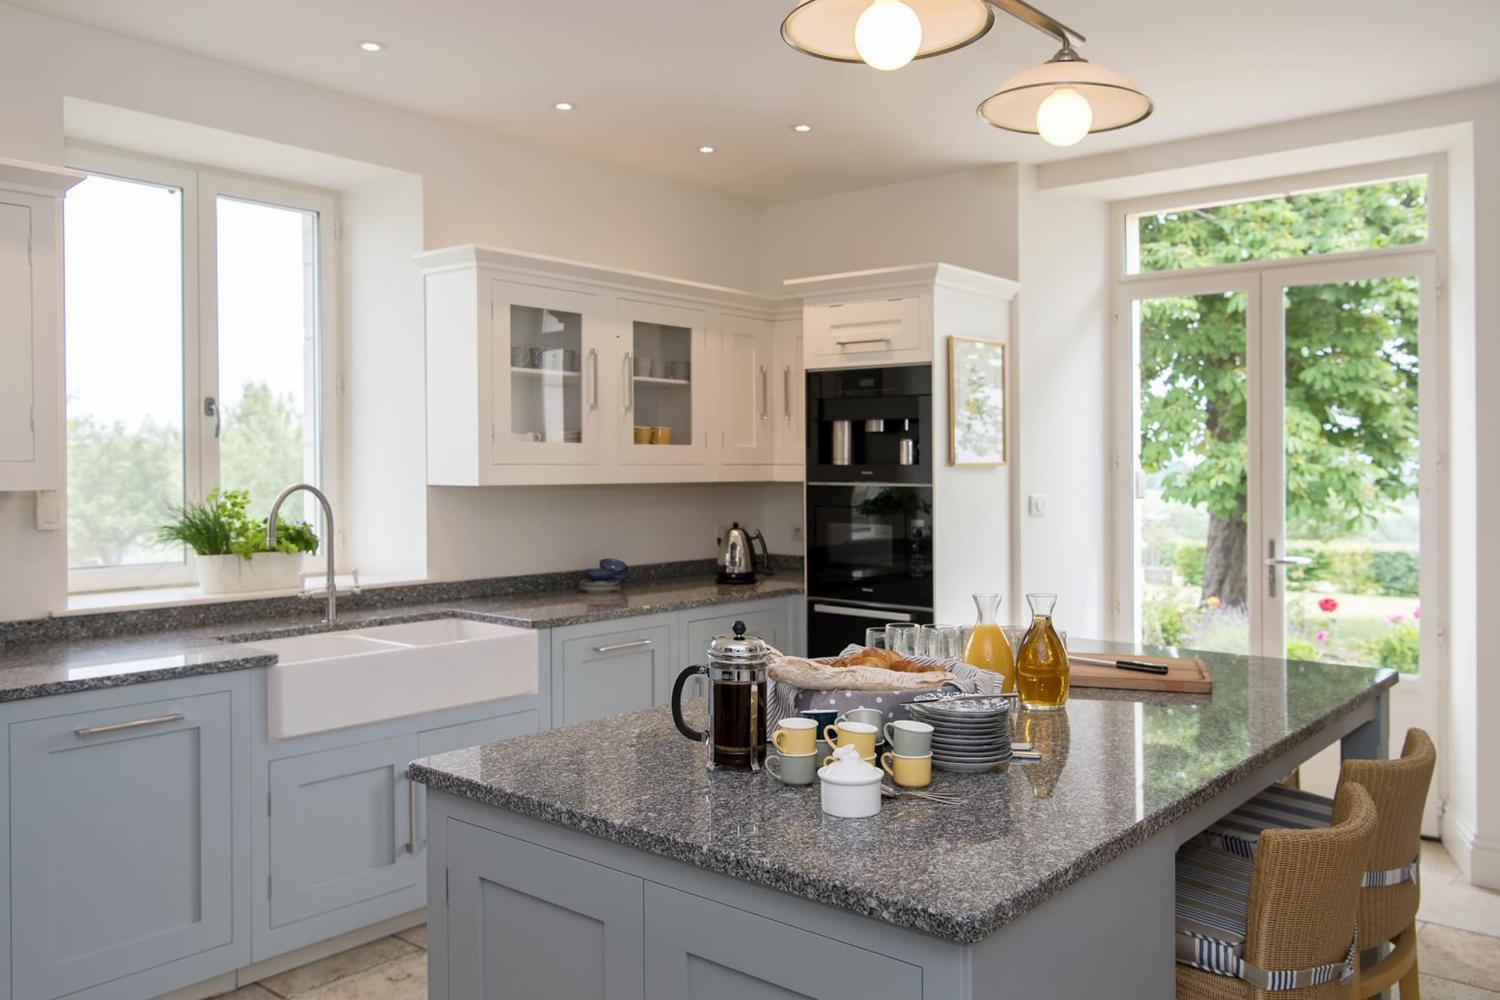 Kitchen | Holiday home in the Tarn